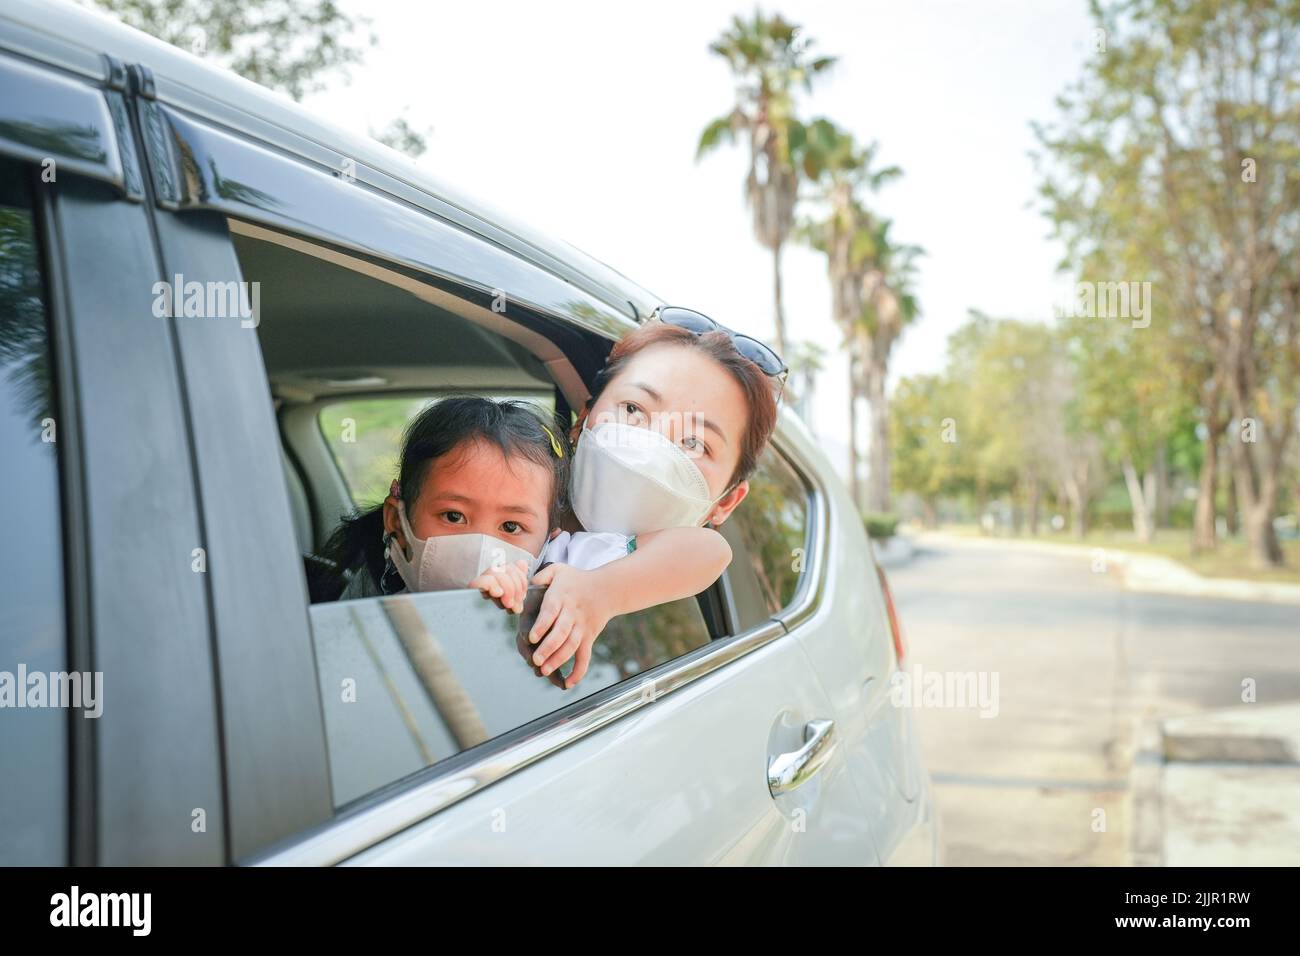 A beautiful Southeast Asian woman and her child wearing face masks looking out of the car window Stock Photo